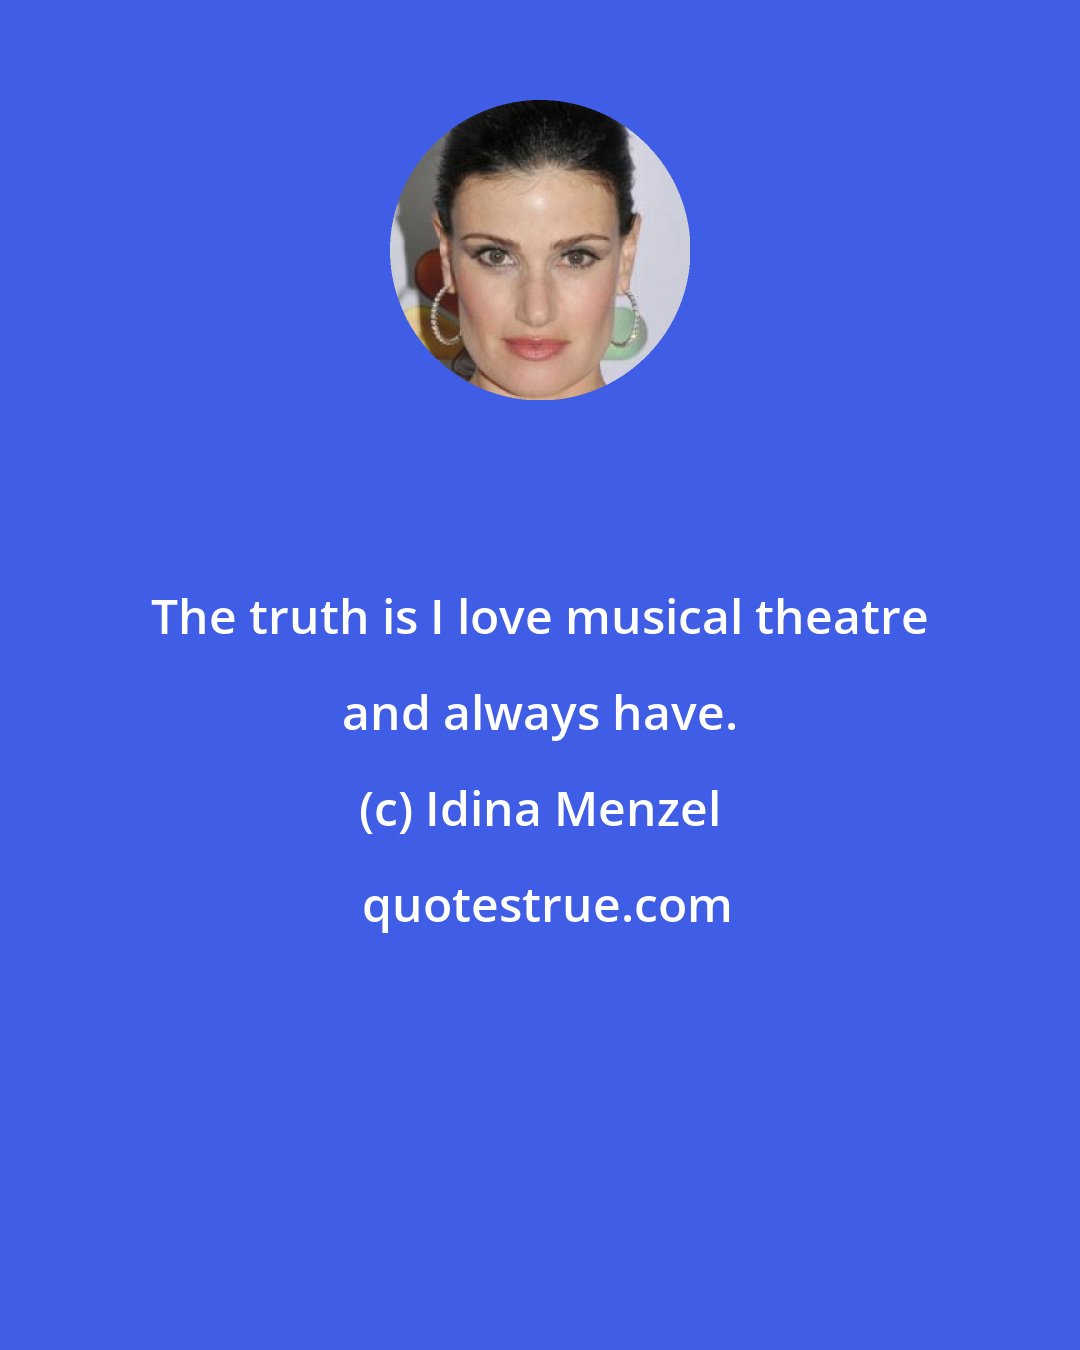 Idina Menzel: The truth is I love musical theatre and always have.